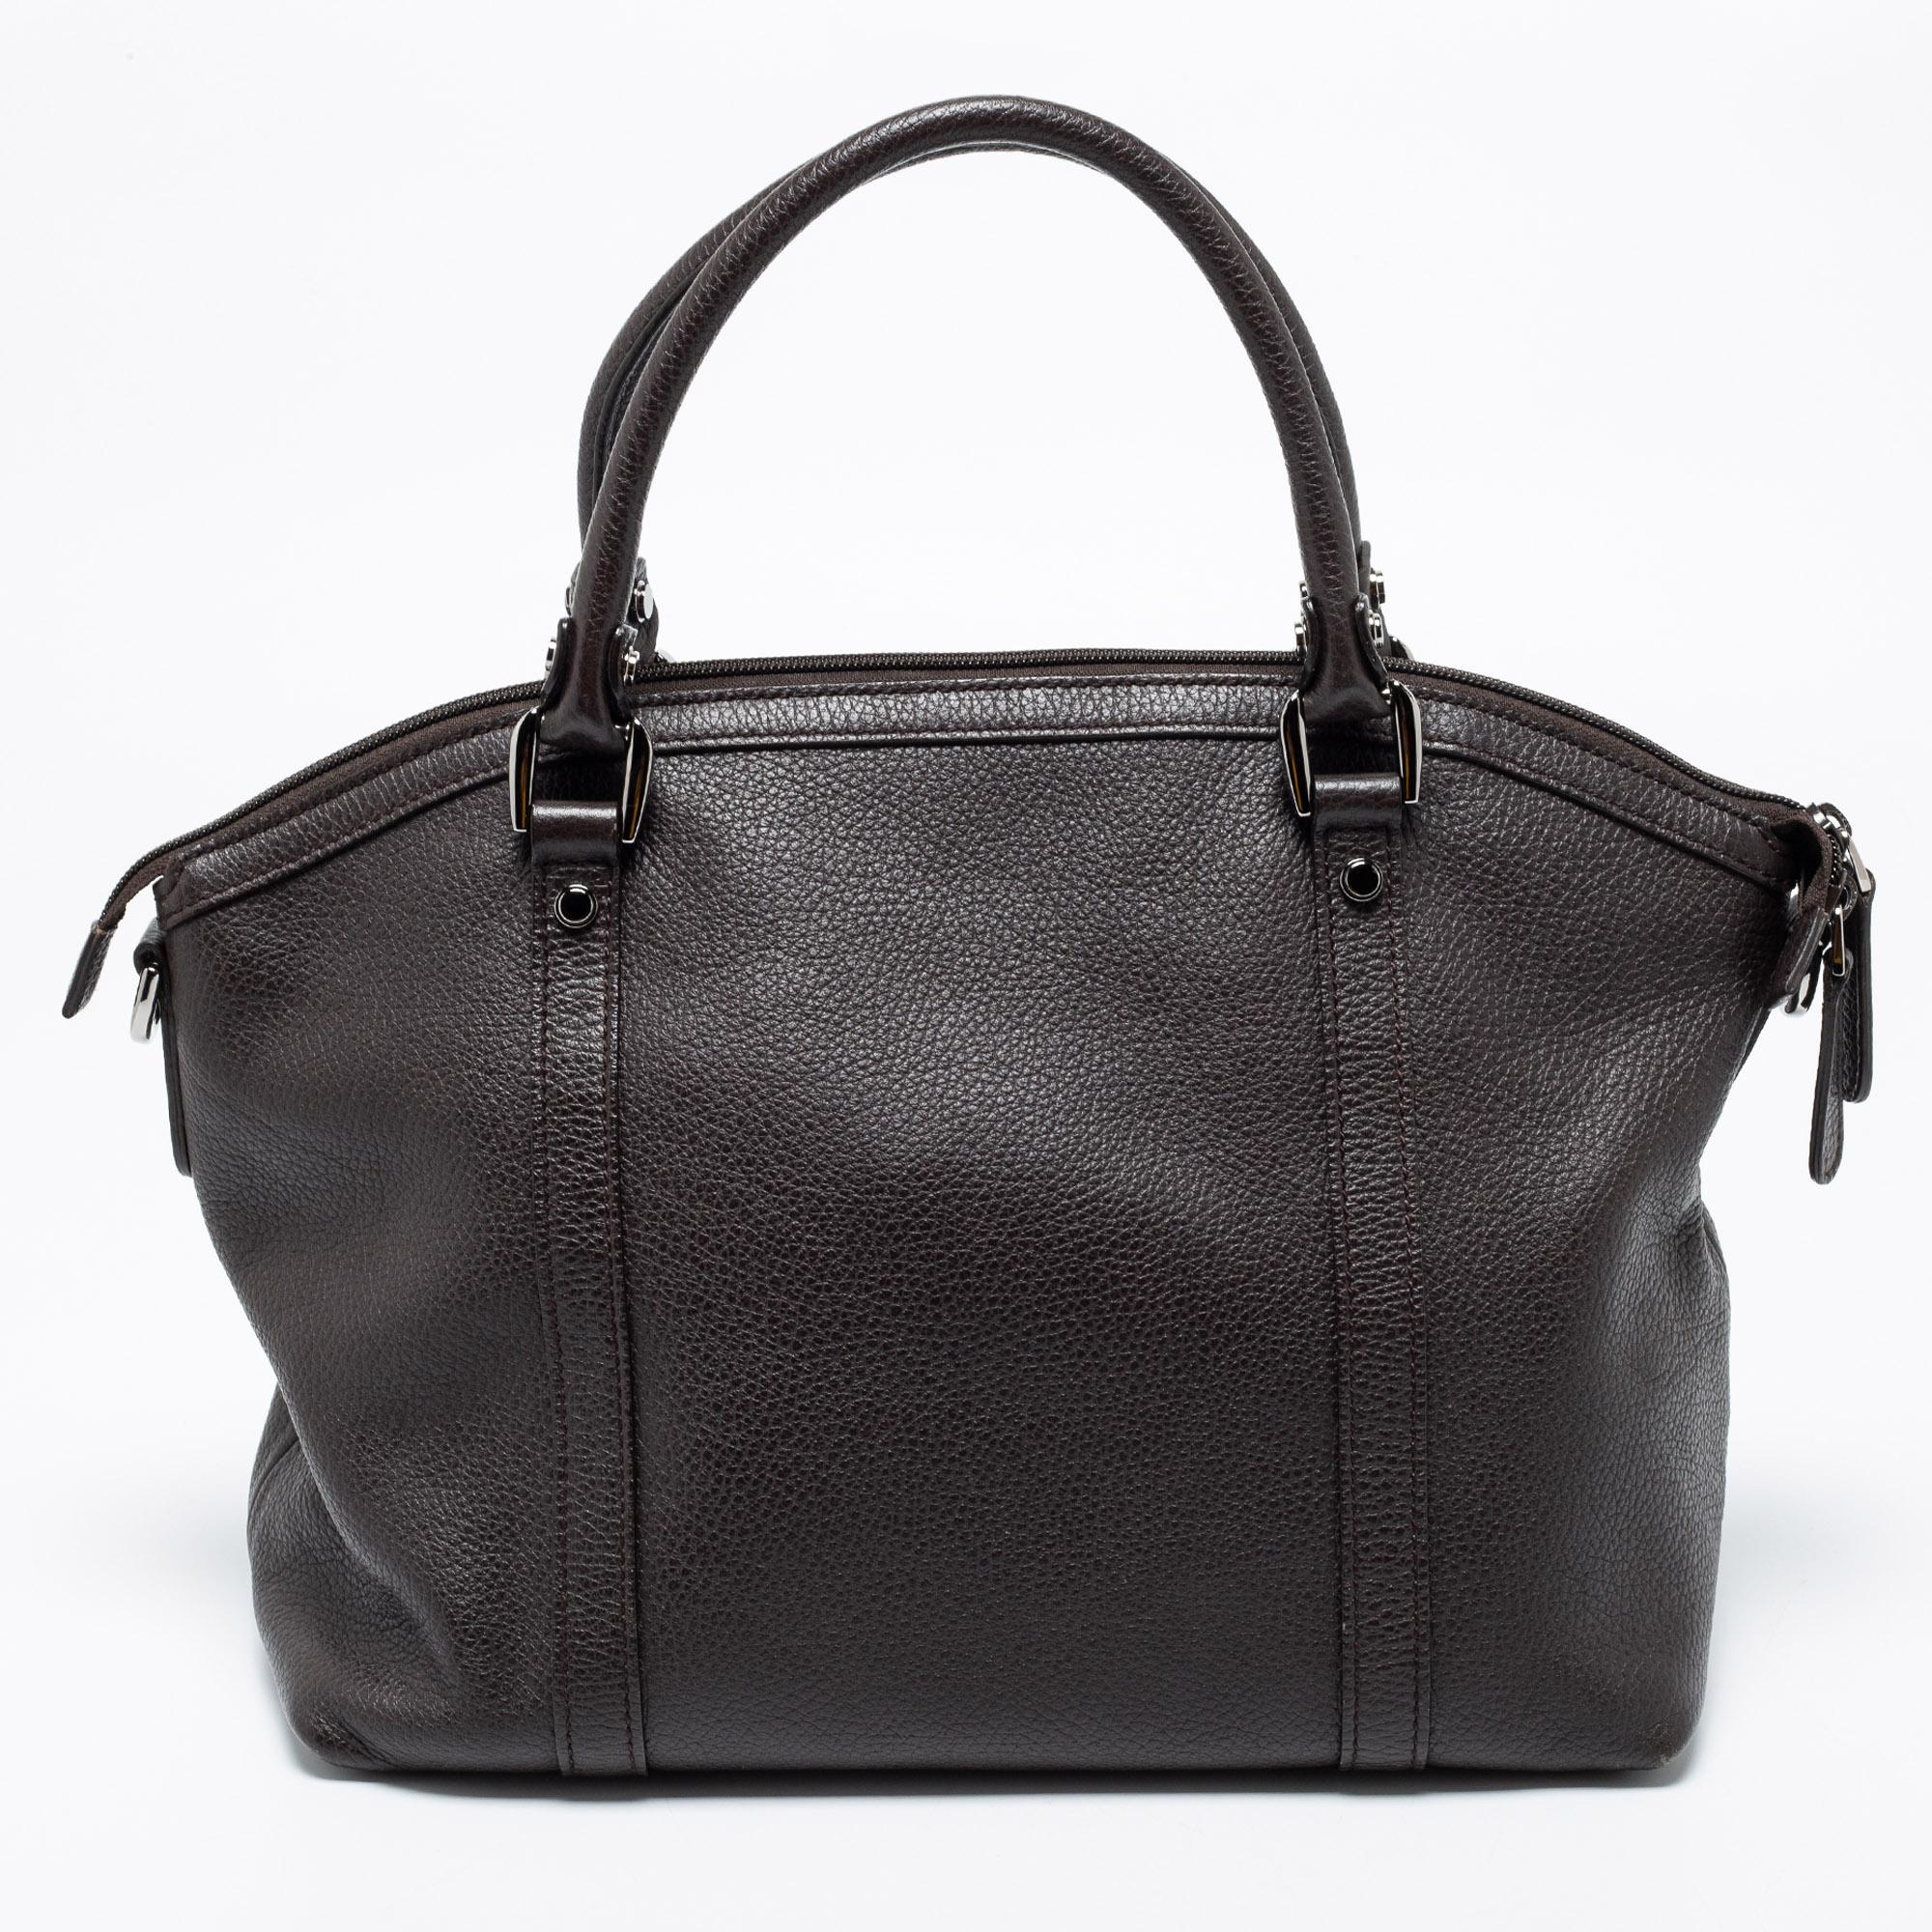 Compact and handy, this Dome satchel from the House of Gucci will work well as an everyday accessory. It is crafted from dark-brown leather, which features GG charms on the front. It is adorned with Dark Ruthenium hardware, a leather-fabric